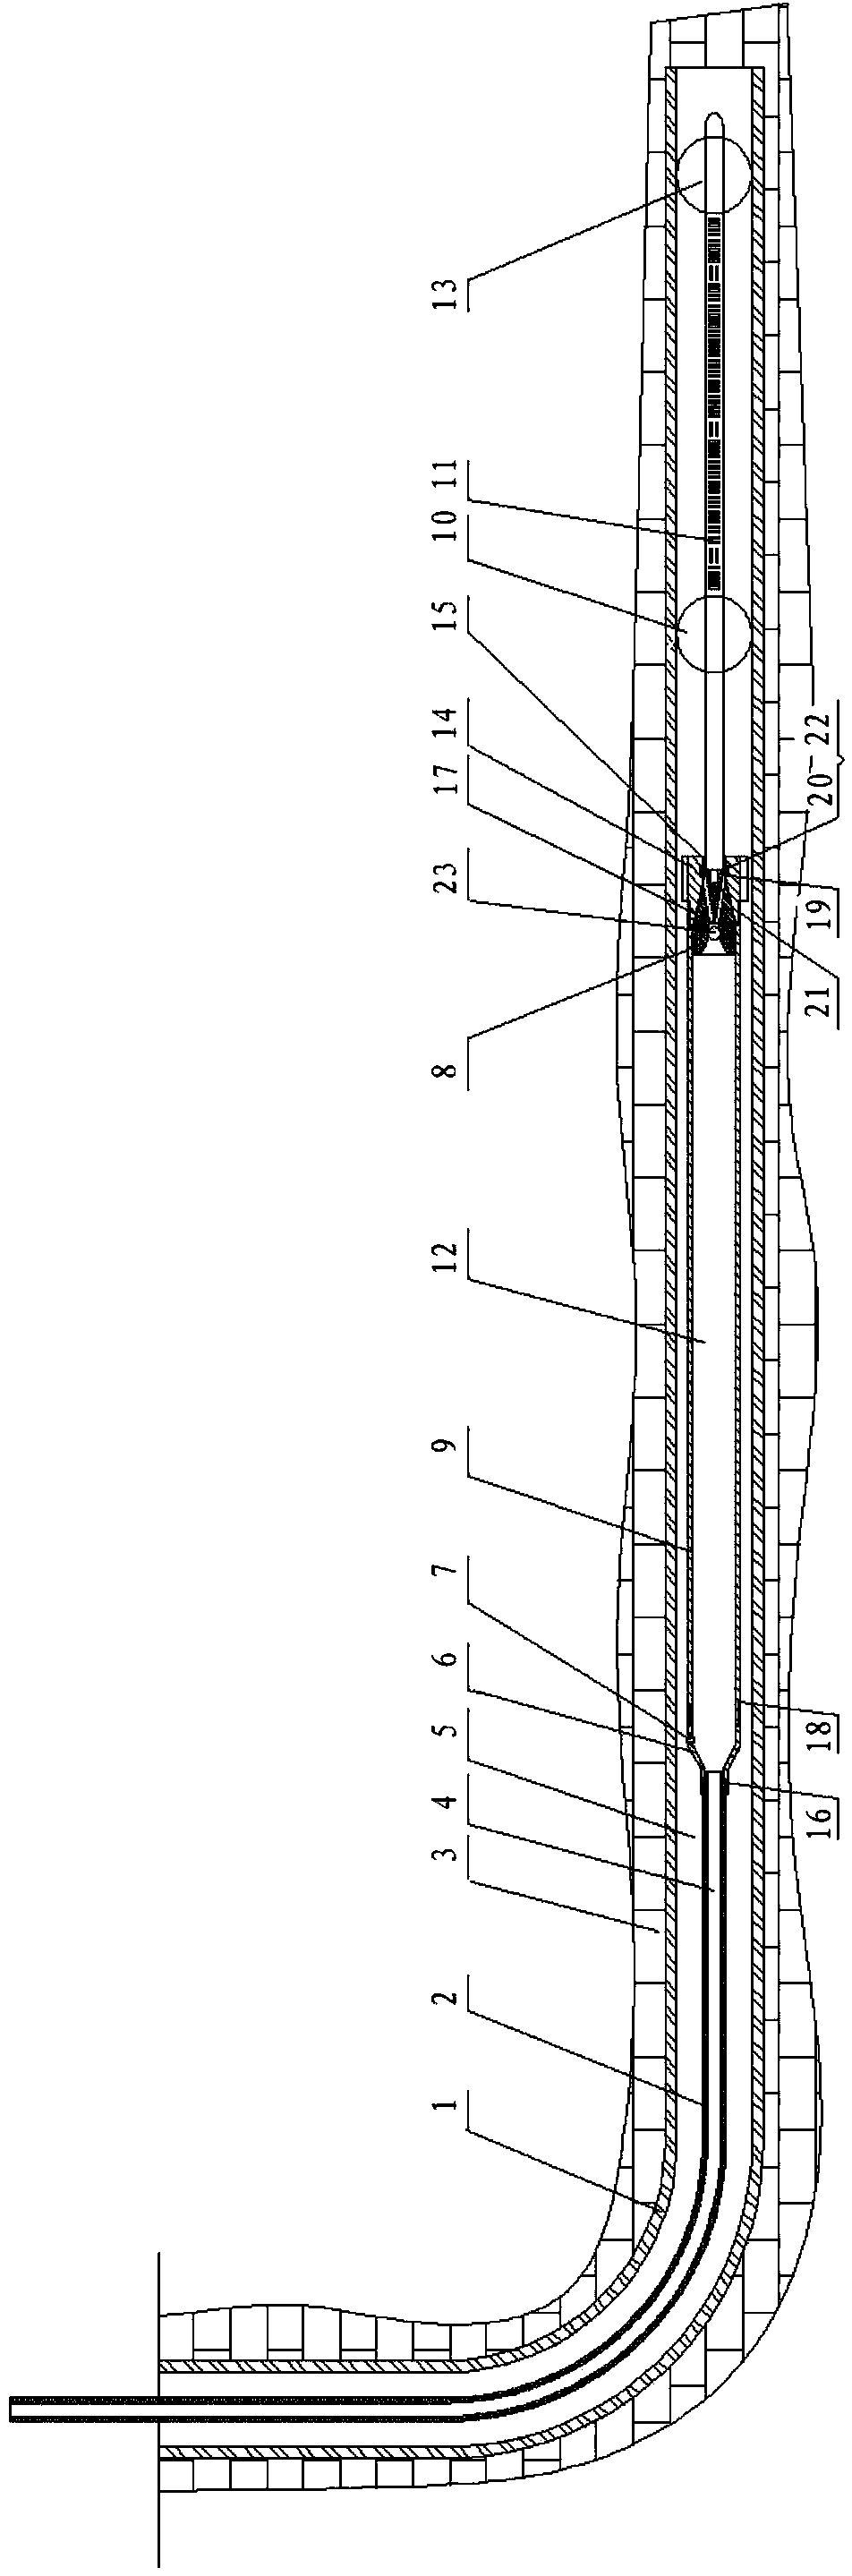 Device and method for integrating well dredging and well flushing, and well logging of cement bond well cementing quality